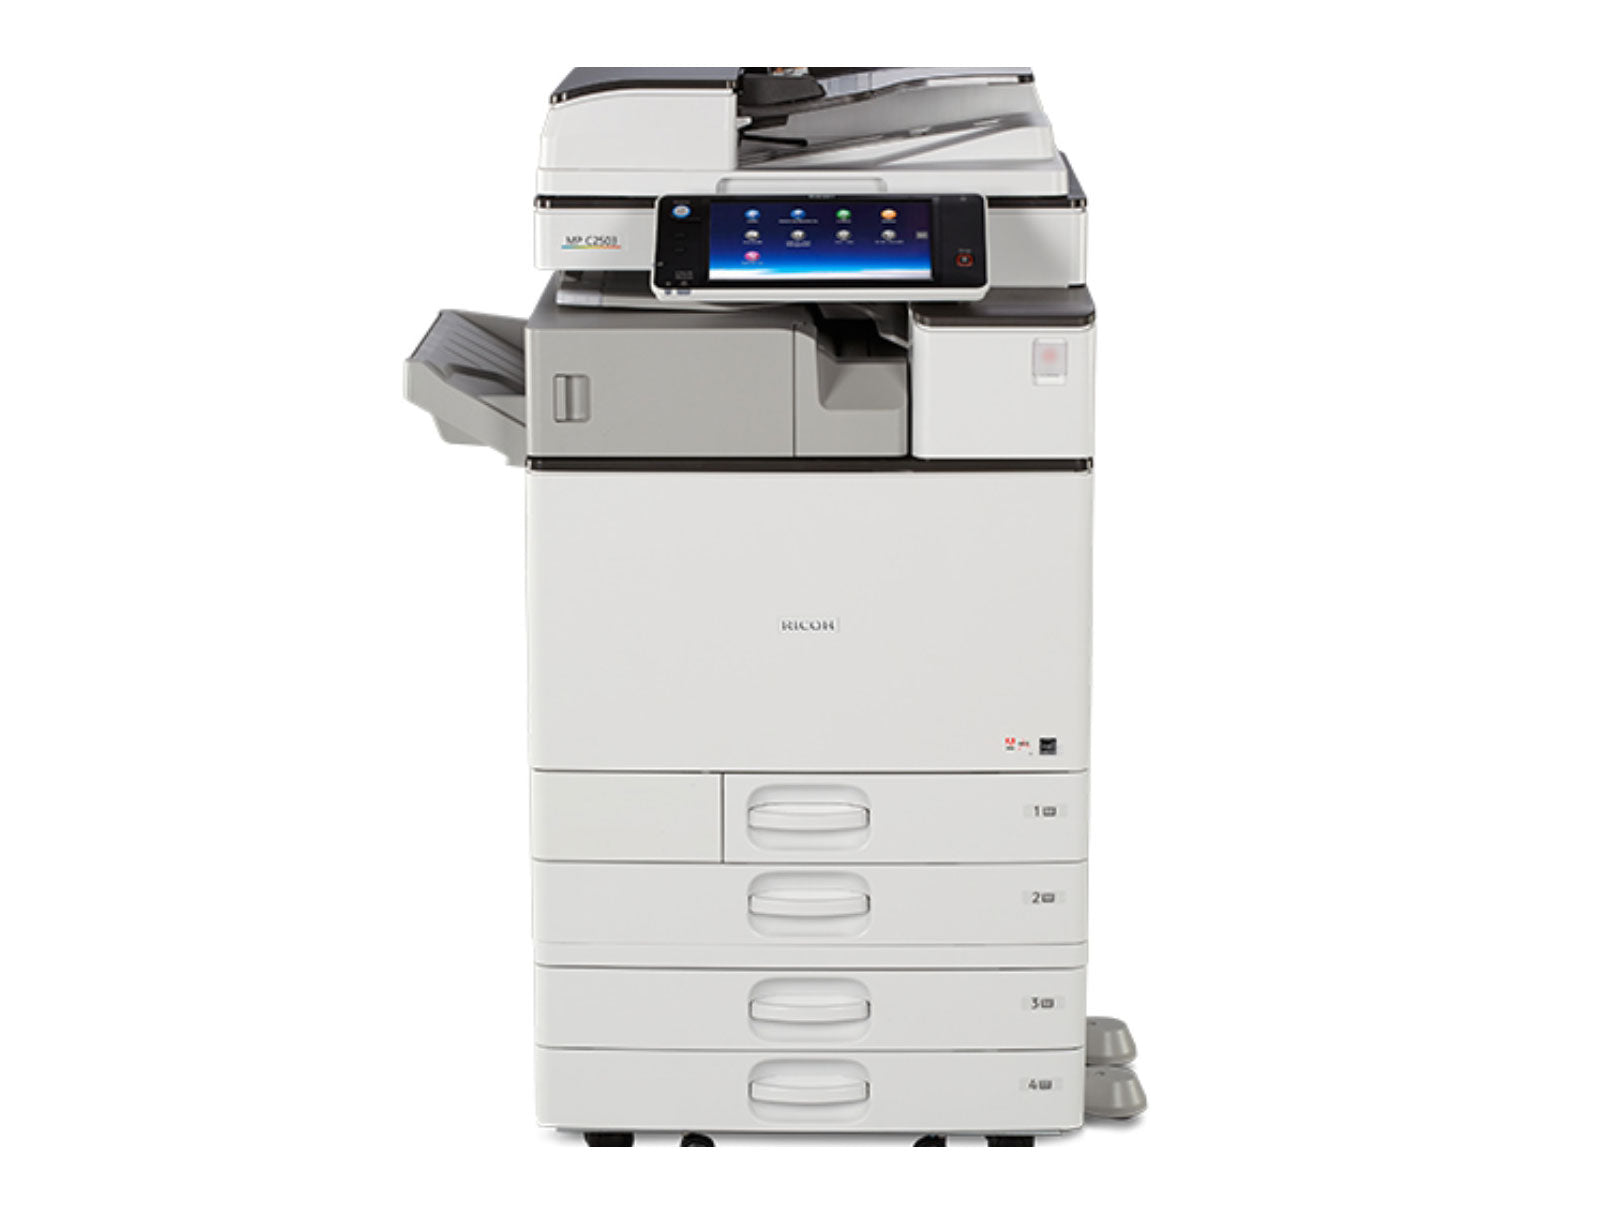 REPOSSESSED Ricoh MP C4503 HIGH SPEED 45 PPM Color 11x17 12x18 Photocopier Printer Copy Machine BUY LEASE